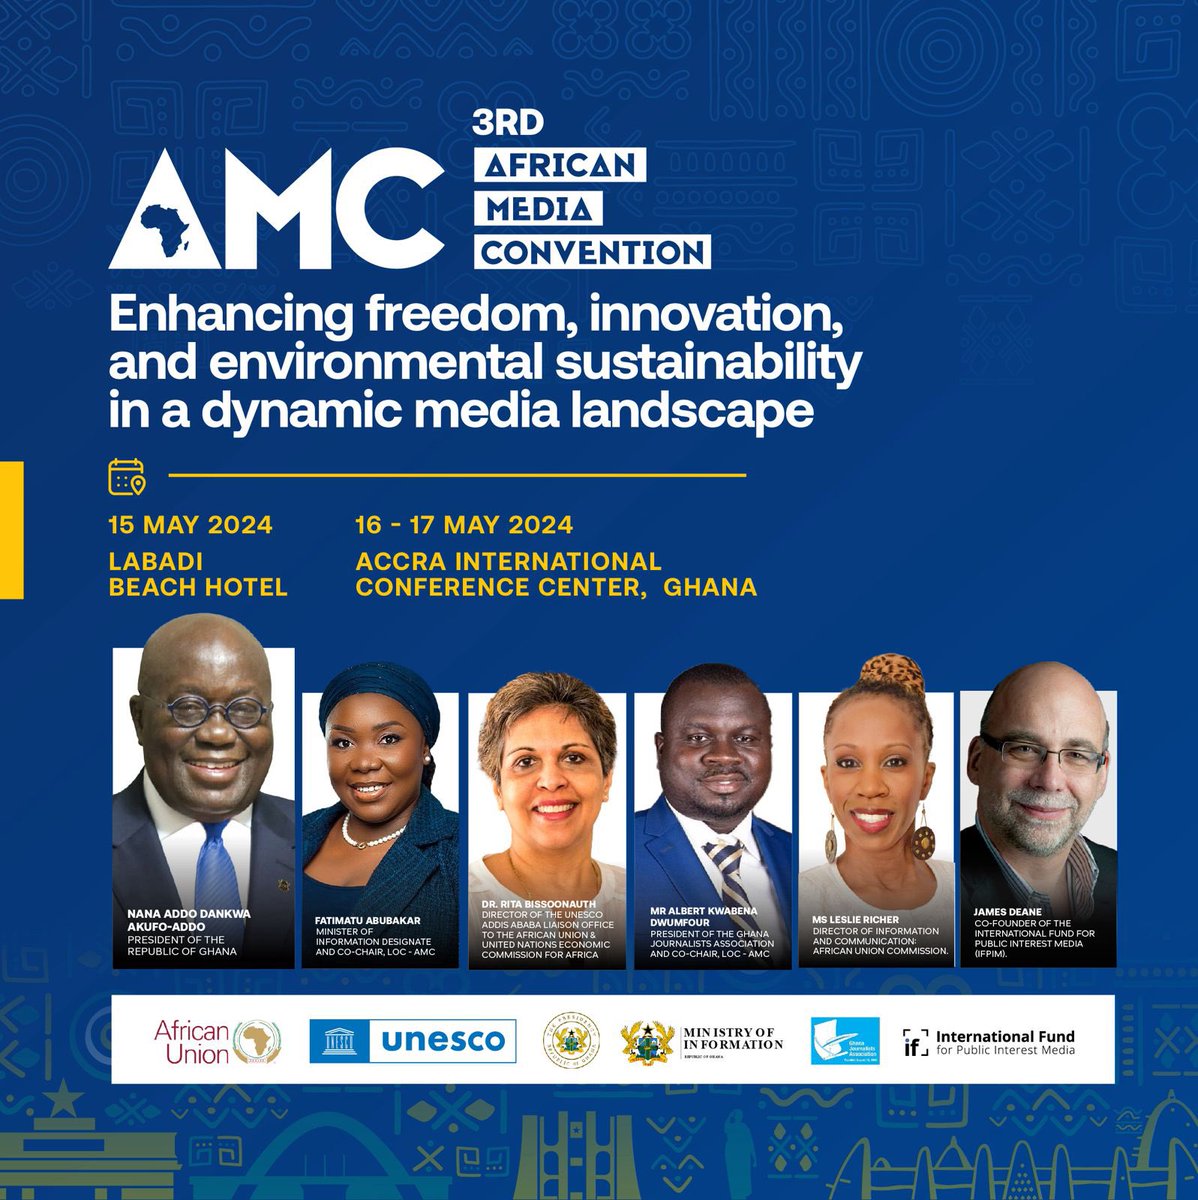 3rd African Media Convention, AMC GHANA 2024 is here! Join us tomorrow at the Labadi Beach Hotel for day 1 of the biggest gathering of the media fraternity in Africa. Day 2 and 3 will take place at the Accra International Conference Center from 16-17 May 2024. At this